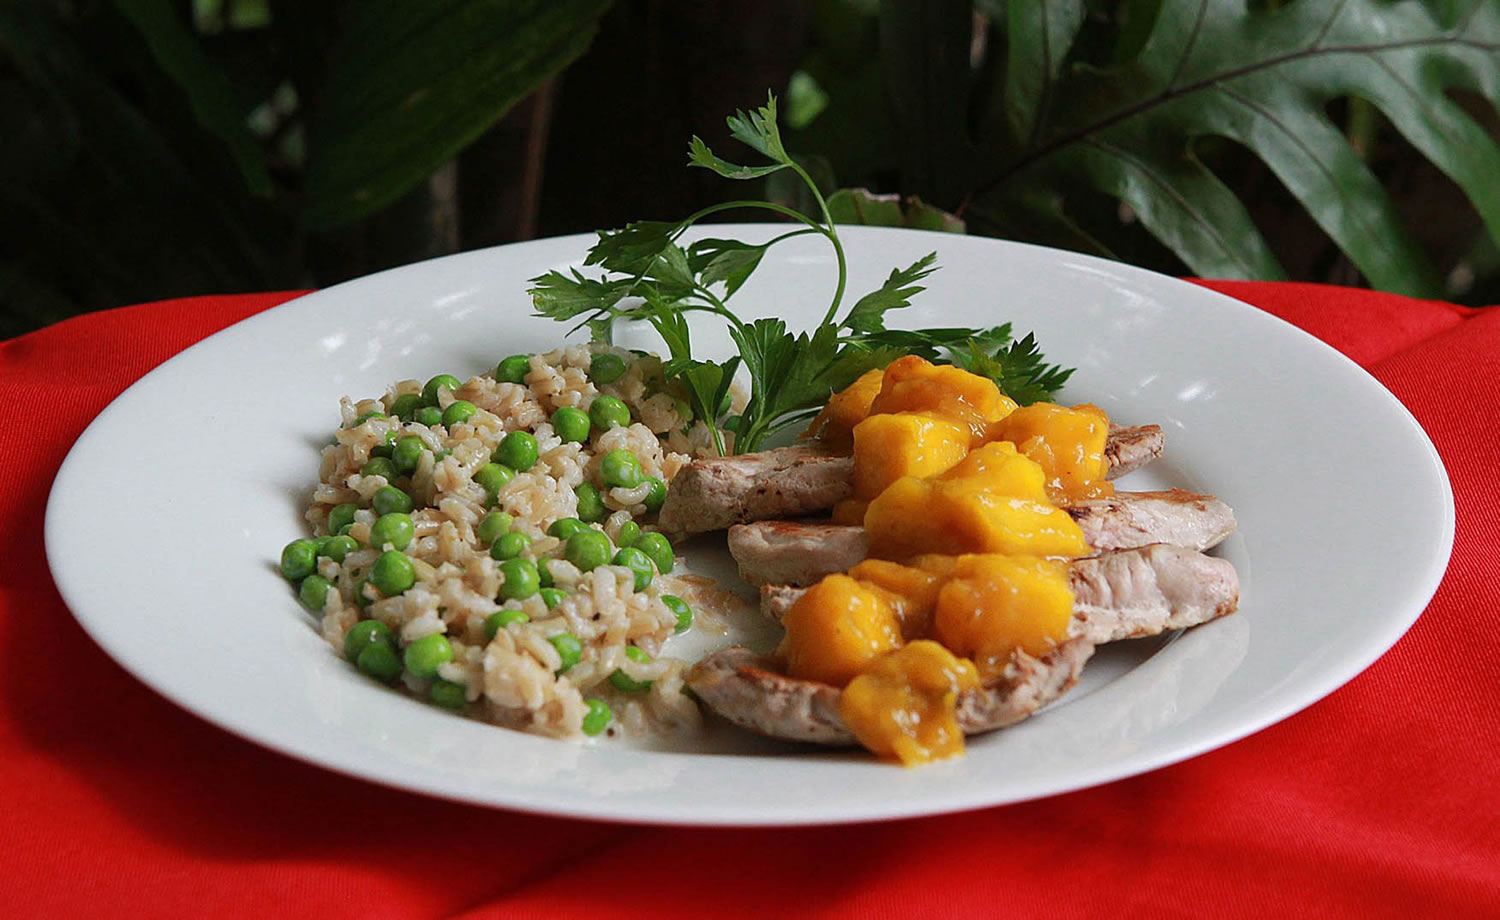 Try sweet, juicy Florida mangoes to make a quick, rum-flavored sauce for pork scaloppini.